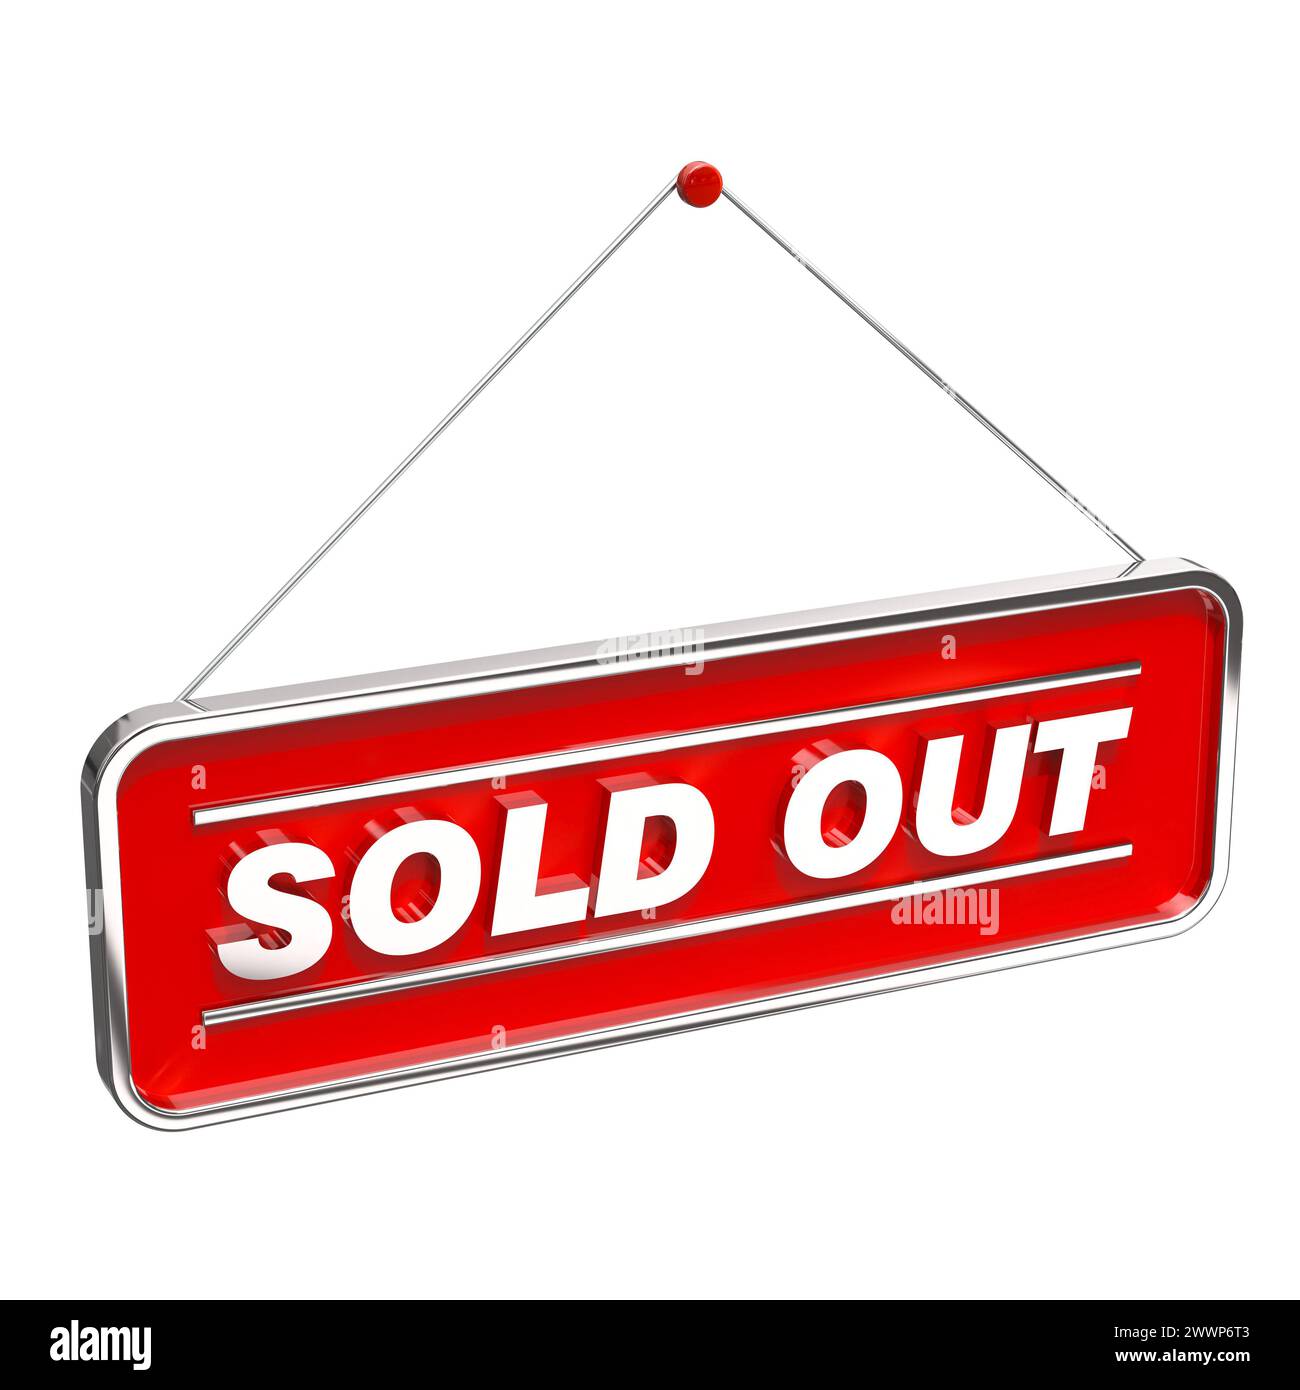 Sold out sign Cut Out Stock Images & Pictures - Alamy